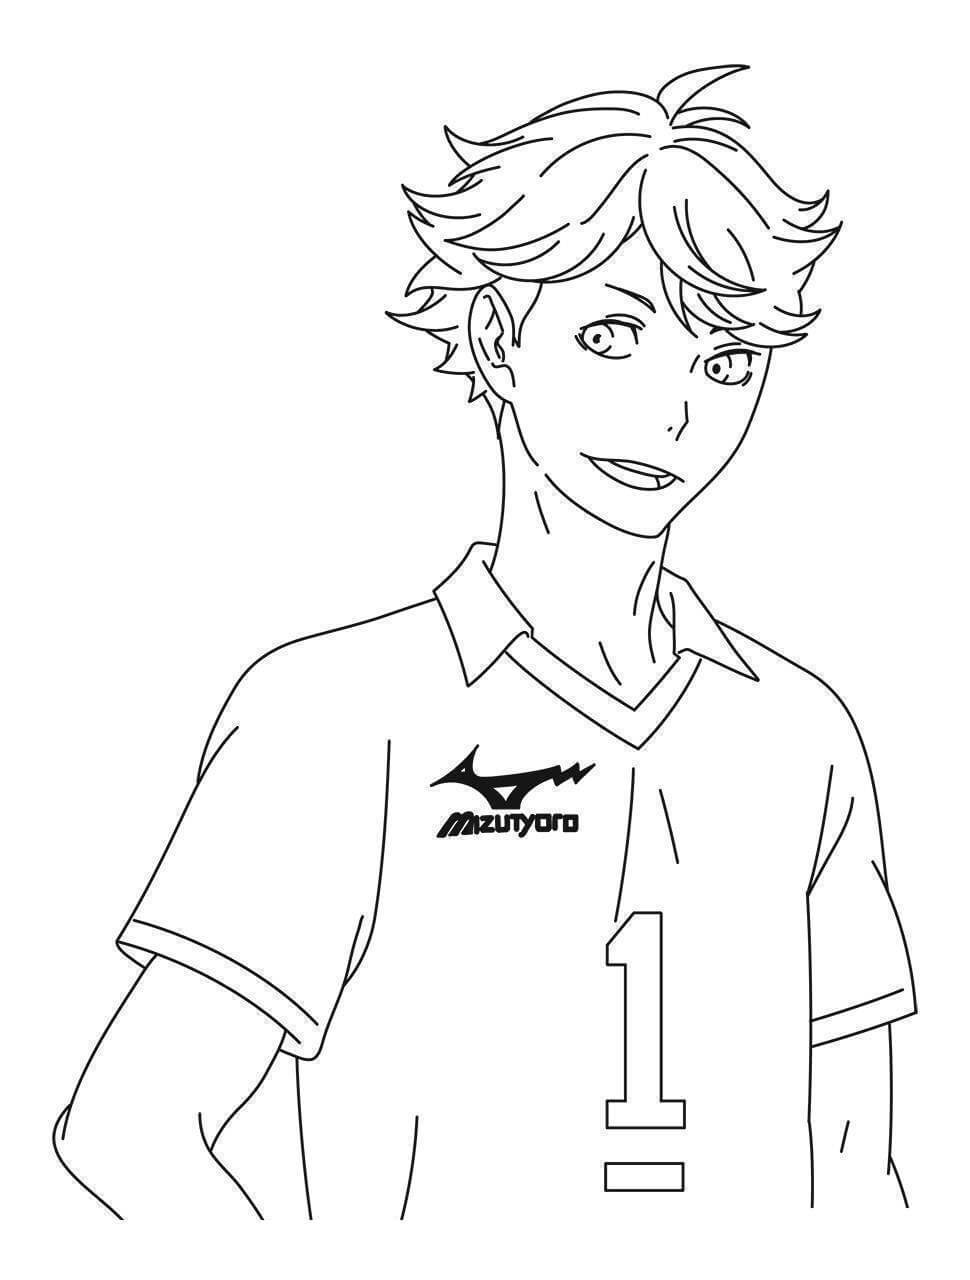 Haikyuu Coloring Pages   Free Printable Coloring Pages for Kids